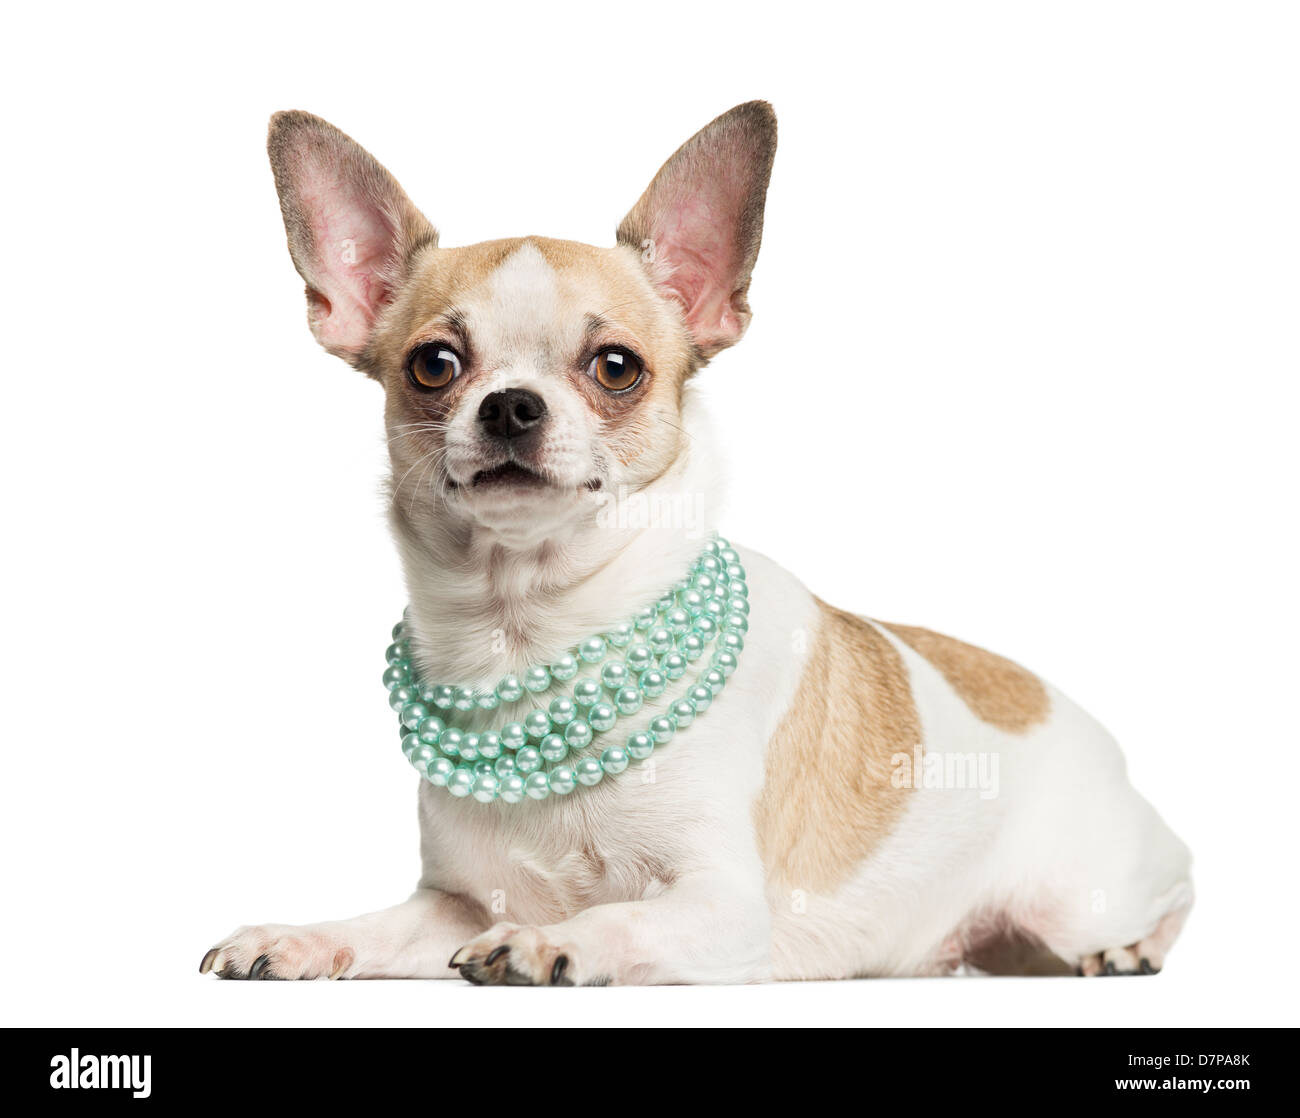 Chihuahua, 2 years old, lying and wearing a pearl necklace against white background Stock Photo